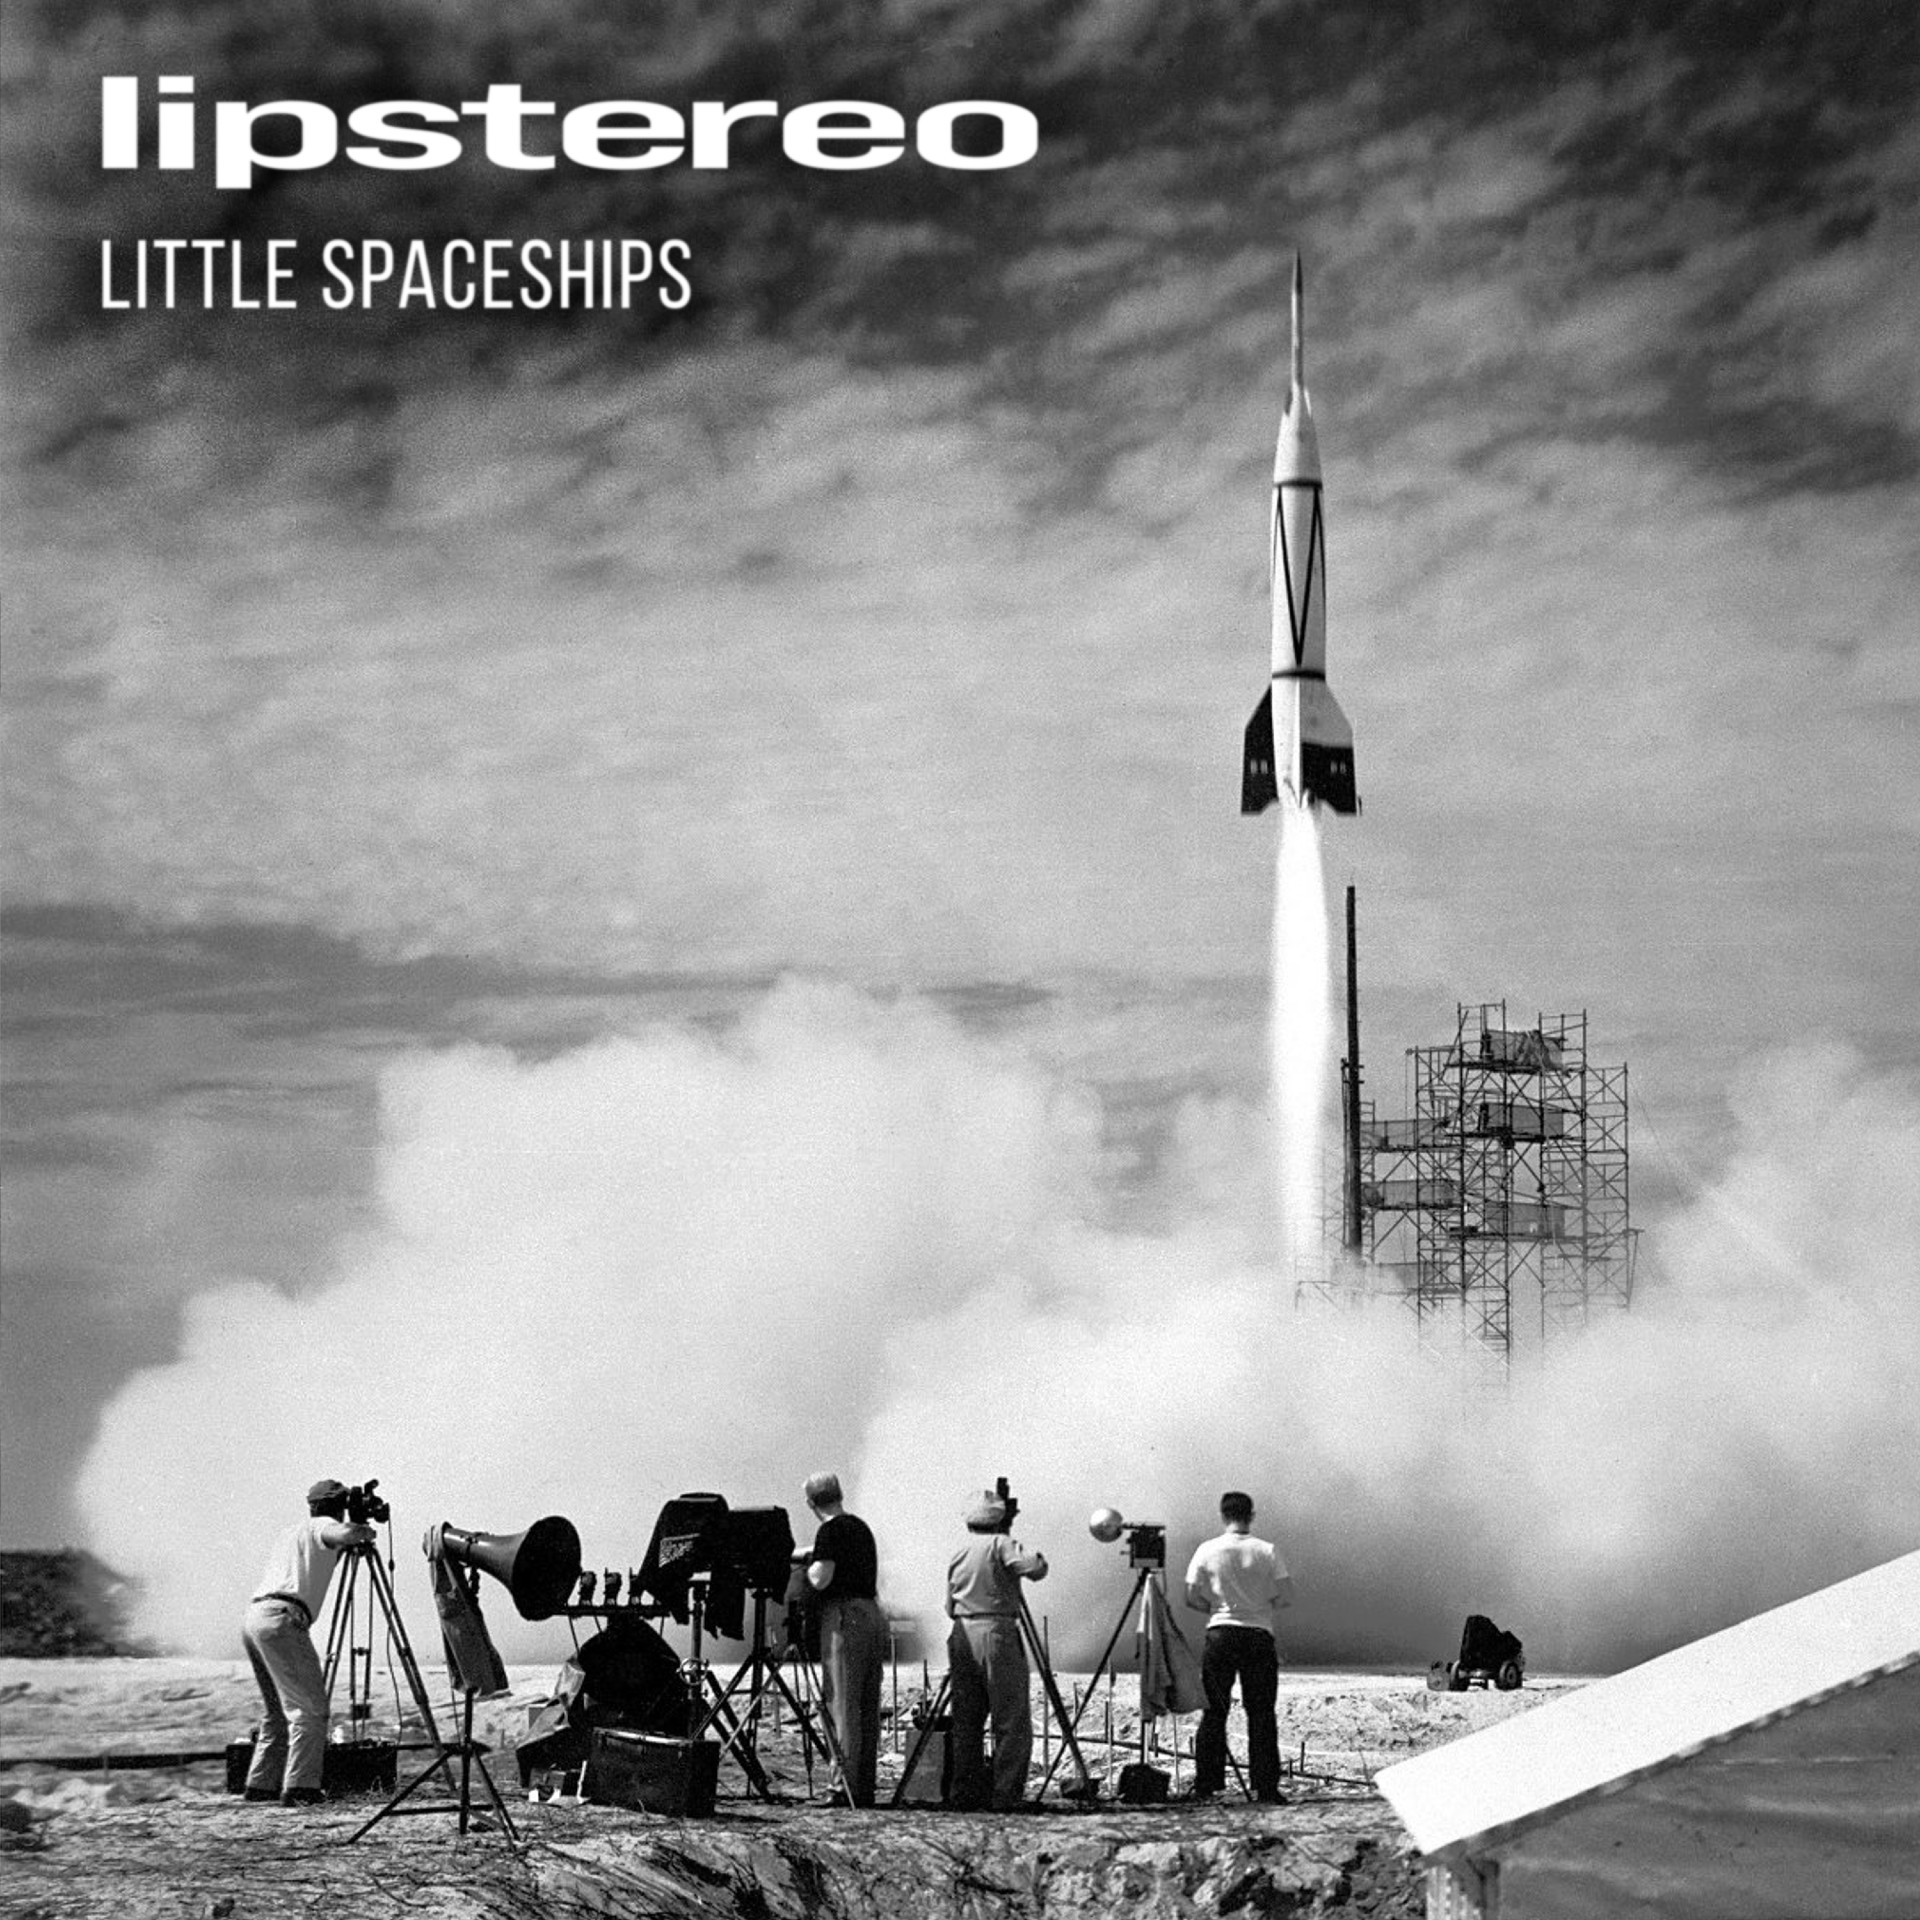 Artwork for the single “Little Spaceships” by Lipstereo